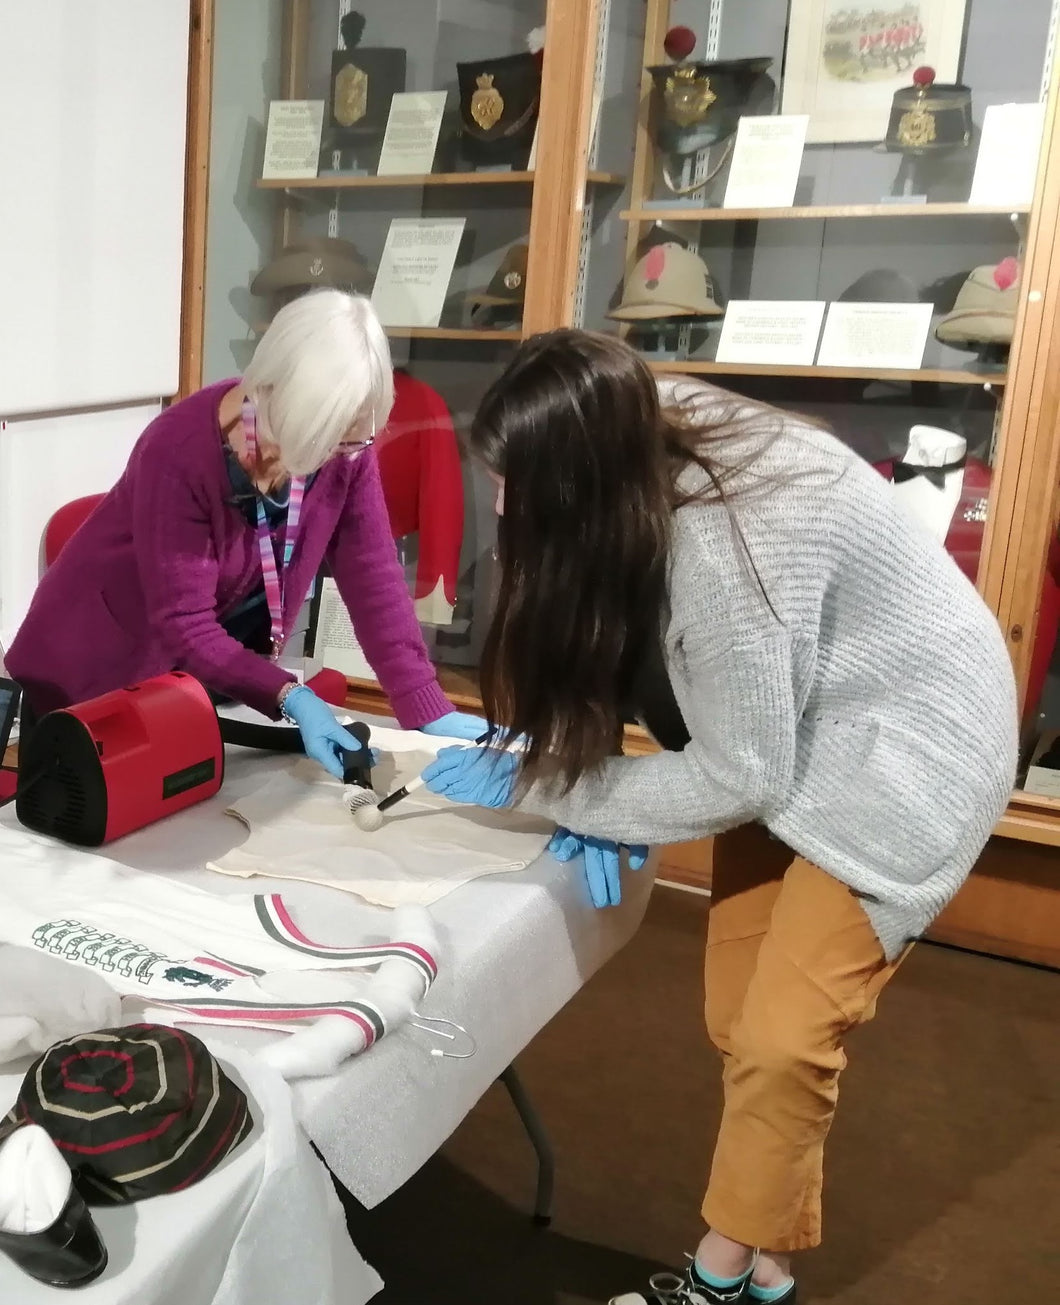 The image shows two female museum volunteers cleaning a vest in the museum gallery using a small red and black museum vacuum cleaner.